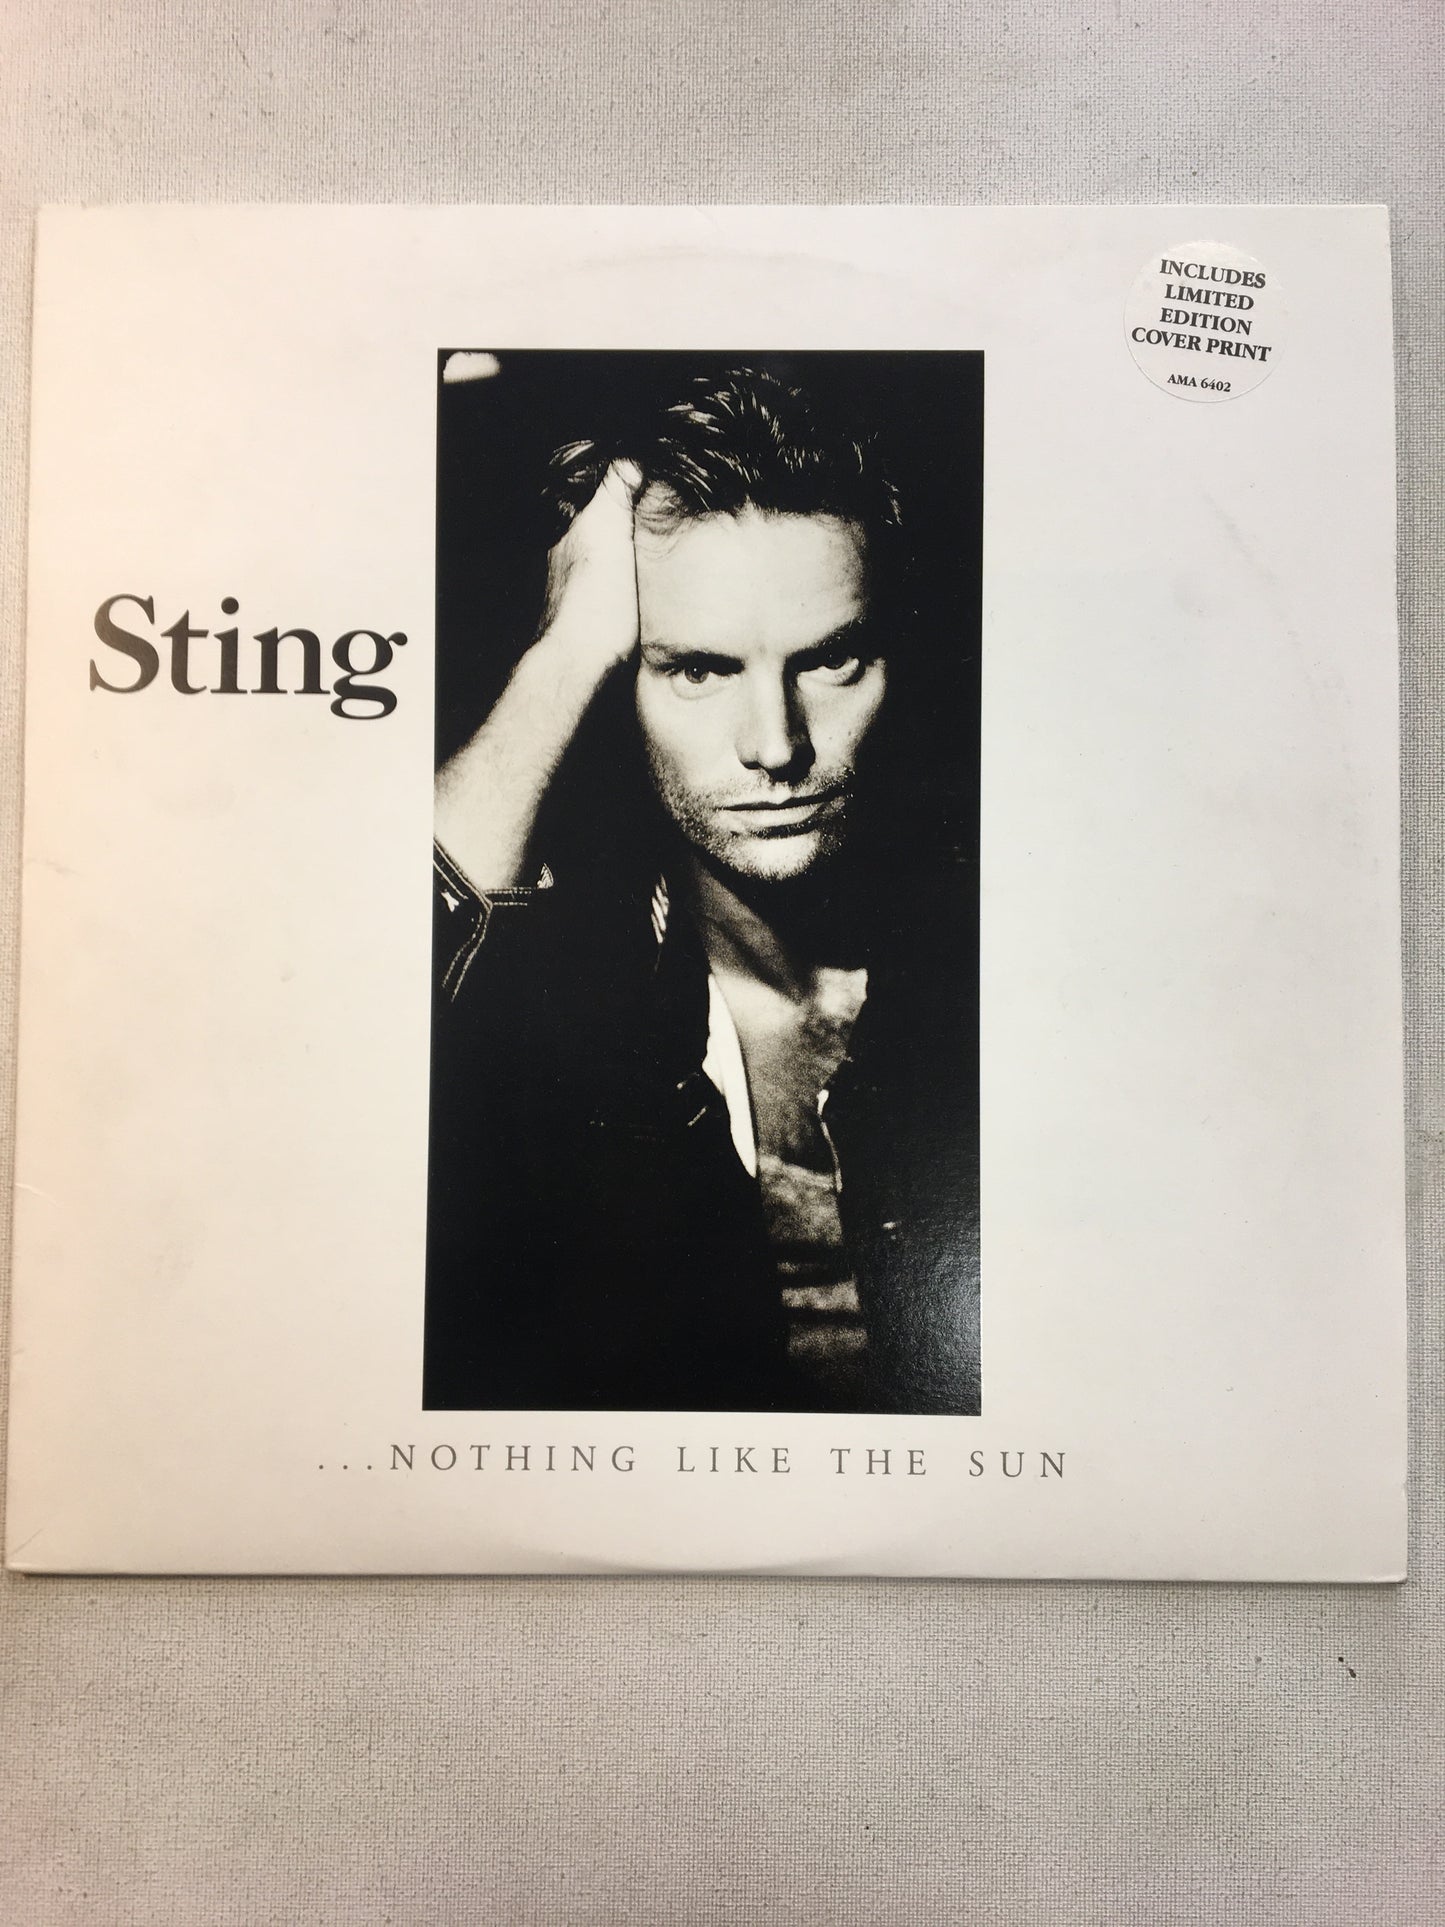 STING 2 LP ; NOTHING LIKE THE SUN